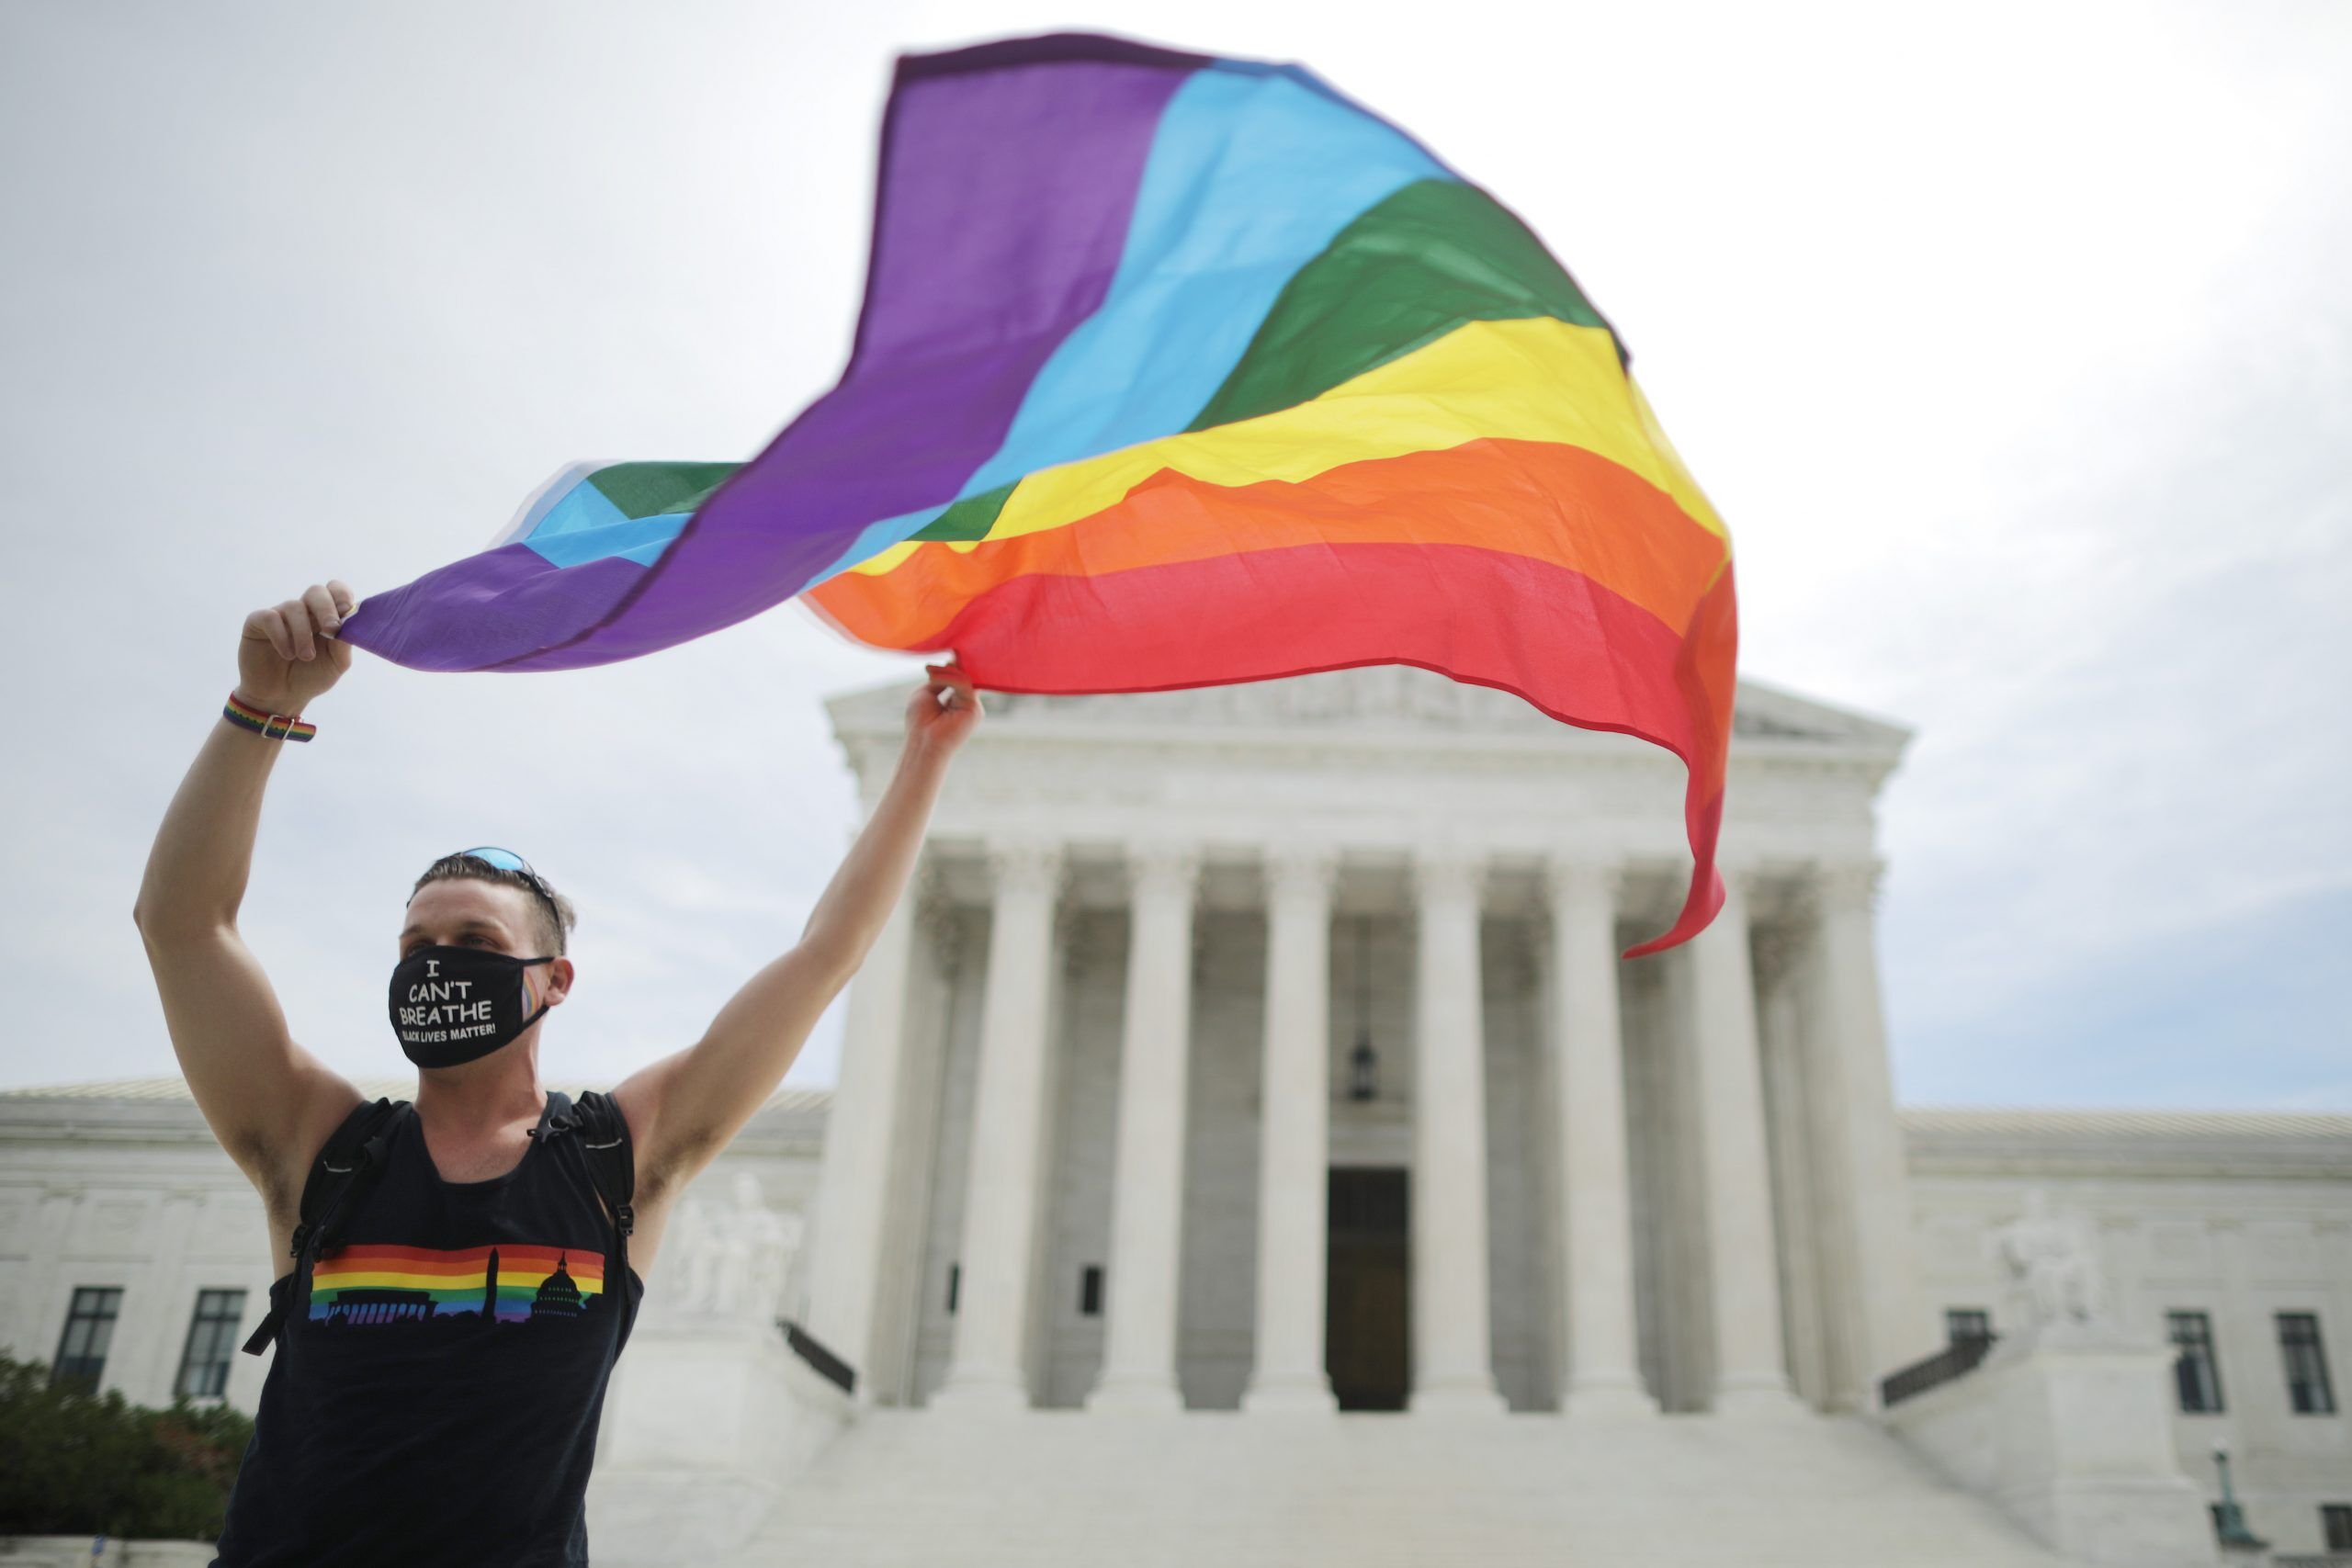 WASHINGTON, DC - JUNE 15: Joseph Fons holding a Pride Flag in front of the U.S. Supreme Court building after the court ruled that LGBTQ people can not be disciplined or fired based on their sexual orientation, Washington, DC, June 15, 2020. With Chief Justice John Roberts and Justice Neil Gorsuch joining the Democratic appointees, the court ruled 6-3 that the Civil Rights Act of 1964 bans bias based on sexual orientation or gender identity. Fons is wearing a Black Lives Matter mask with the words 'I Can't Breathe', as a precaution against COVID-19.